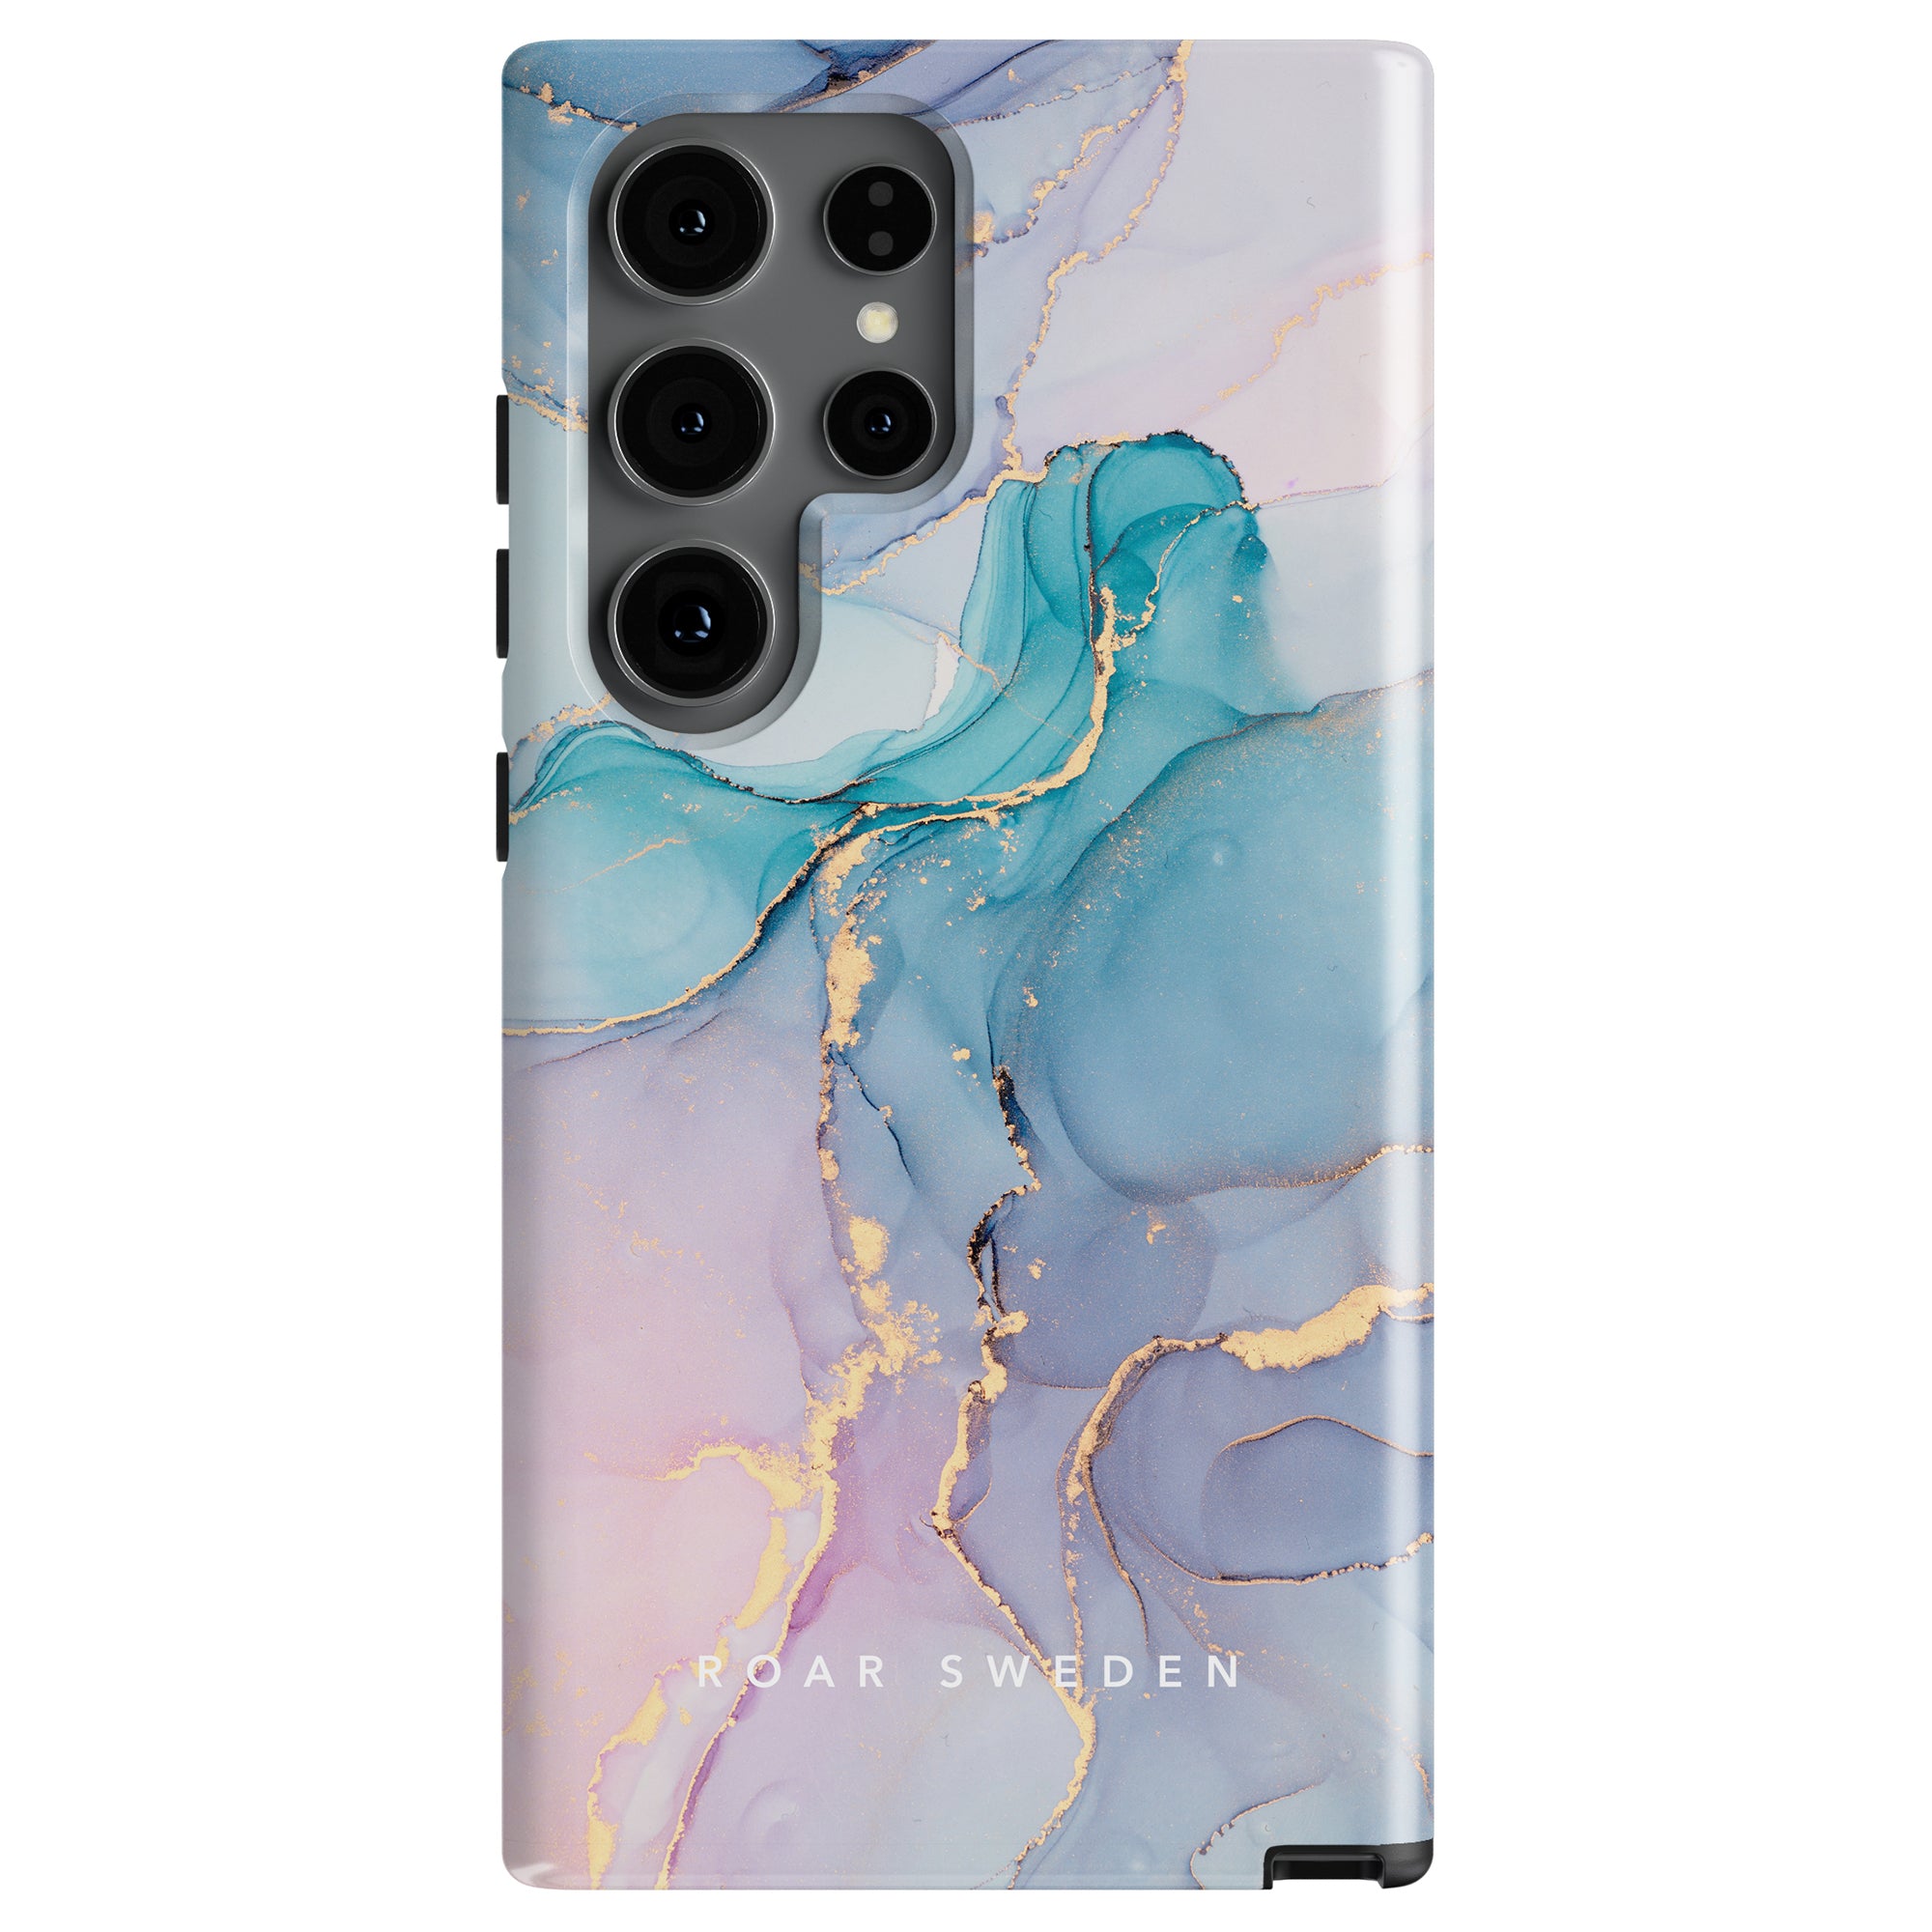 A smartphone with a colorful abstract marbled case featuring shades of blue, violet, and gold accents. The Swirl - Tough case offers hållbarhet with the text "ROAR SWEDEN" at the bottom.